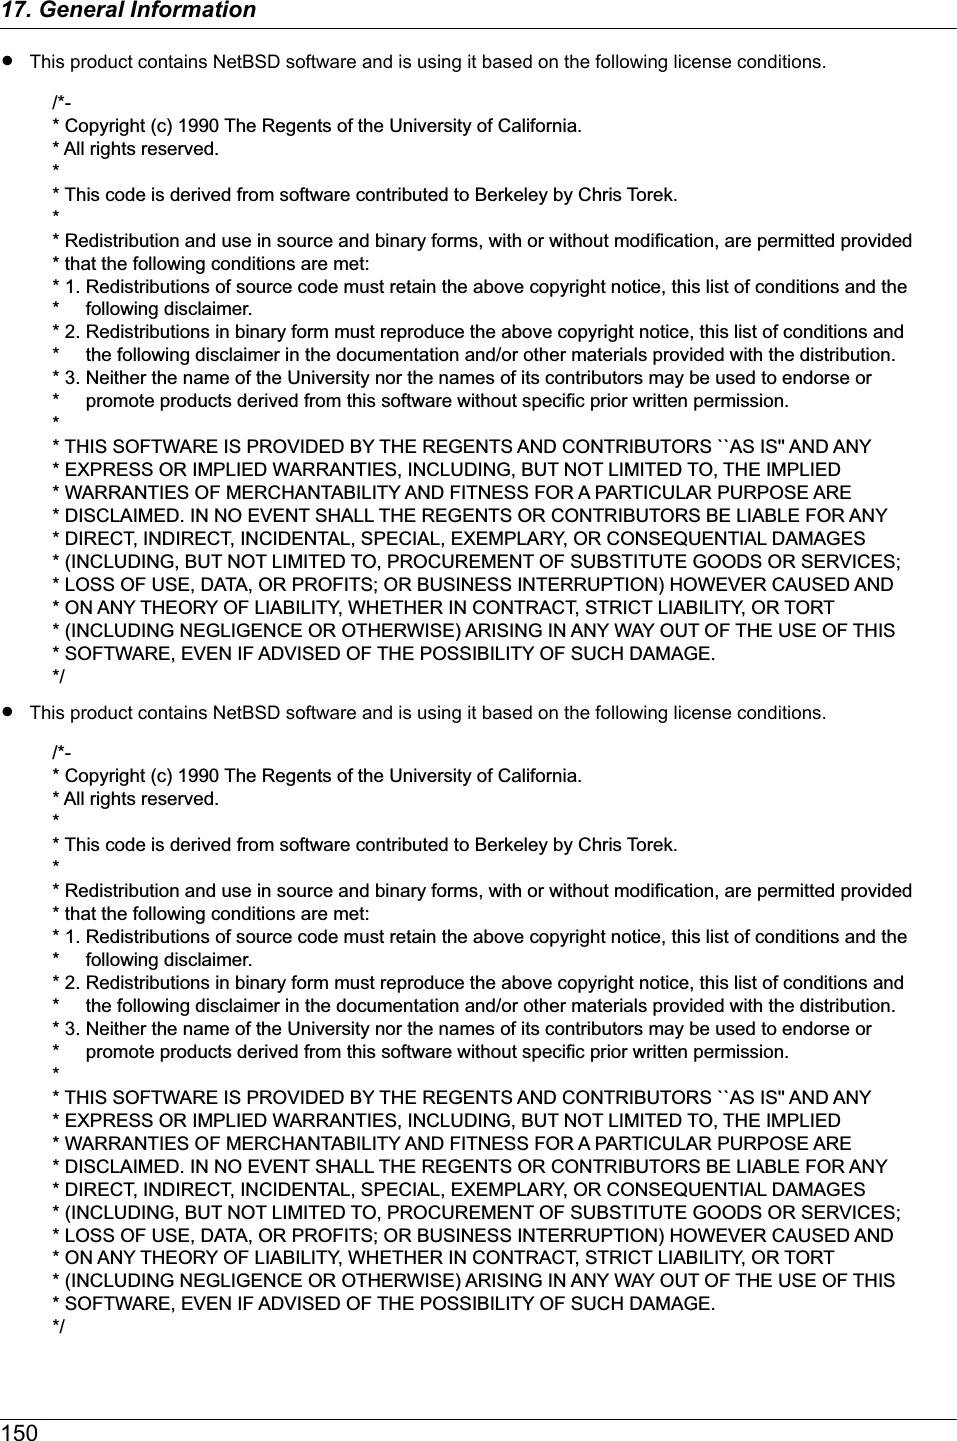 RThis product contains NetBSD software and is using it based on the following license conditions./*-* Copyright (c) 1990 The Regents of the University of California.* All rights reserved.** This code is derived from software contributed to Berkeley by Chris Torek.** Redistribution and use in source and binary forms, with or without modification, are permitted provided * that the following conditions are met:* 1. Redistributions of source code must retain the above copyright notice, this list of conditions and the *     following disclaimer.* 2. Redistributions in binary form must reproduce the above copyright notice, this list of conditions and *     the following disclaimer in the documentation and/or other materials provided with the distribution.* 3. Neither the name of the University nor the names of its contributors may be used to endorse or *     promote products derived from this software without specific prior written permission.** THIS SOFTWARE IS PROVIDED BY THE REGENTS AND CONTRIBUTORS ``AS IS&apos;&apos; AND ANY * EXPRESS OR IMPLIED WARRANTIES, INCLUDING, BUT NOT LIMITED TO, THE IMPLIED * WARRANTIES OF MERCHANTABILITY AND FITNESS FOR A PARTICULAR PURPOSE ARE * DISCLAIMED. IN NO EVENT SHALL THE REGENTS OR CONTRIBUTORS BE LIABLE FOR ANY * DIRECT, INDIRECT, INCIDENTAL, SPECIAL, EXEMPLARY, OR CONSEQUENTIAL DAMAGES * (INCLUDING, BUT NOT LIMITED TO, PROCUREMENT OF SUBSTITUTE GOODS OR SERVICES; * LOSS OF USE, DATA, OR PROFITS; OR BUSINESS INTERRUPTION) HOWEVER CAUSED AND * ON ANY THEORY OF LIABILITY, WHETHER IN CONTRACT, STRICT LIABILITY, OR TORT * (INCLUDING NEGLIGENCE OR OTHERWISE) ARISING IN ANY WAY OUT OF THE USE OF THIS * SOFTWARE, EVEN IF ADVISED OF THE POSSIBILITY OF SUCH DAMAGE.*/RThis product contains NetBSD software and is using it based on the following license conditions./*-* Copyright (c) 1990 The Regents of the University of California.* All rights reserved.** This code is derived from software contributed to Berkeley by Chris Torek.** Redistribution and use in source and binary forms, with or without modification, are permitted provided * that the following conditions are met:* 1. Redistributions of source code must retain the above copyright notice, this list of conditions and the *     following disclaimer.* 2. Redistributions in binary form must reproduce the above copyright notice, this list of conditions and *     the following disclaimer in the documentation and/or other materials provided with the distribution.* 3. Neither the name of the University nor the names of its contributors may be used to endorse or *     promote products derived from this software without specific prior written permission.** THIS SOFTWARE IS PROVIDED BY THE REGENTS AND CONTRIBUTORS ``AS IS&apos;&apos; AND ANY * EXPRESS OR IMPLIED WARRANTIES, INCLUDING, BUT NOT LIMITED TO, THE IMPLIED * WARRANTIES OF MERCHANTABILITY AND FITNESS FOR A PARTICULAR PURPOSE ARE * DISCLAIMED. IN NO EVENT SHALL THE REGENTS OR CONTRIBUTORS BE LIABLE FOR ANY * DIRECT, INDIRECT, INCIDENTAL, SPECIAL, EXEMPLARY, OR CONSEQUENTIAL DAMAGES * (INCLUDING, BUT NOT LIMITED TO, PROCUREMENT OF SUBSTITUTE GOODS OR SERVICES; * LOSS OF USE, DATA, OR PROFITS; OR BUSINESS INTERRUPTION) HOWEVER CAUSED AND * ON ANY THEORY OF LIABILITY, WHETHER IN CONTRACT, STRICT LIABILITY, OR TORT * (INCLUDING NEGLIGENCE OR OTHERWISE) ARISING IN ANY WAY OUT OF THE USE OF THIS * SOFTWARE, EVEN IF ADVISED OF THE POSSIBILITY OF SUCH DAMAGE.*/15017. General Information